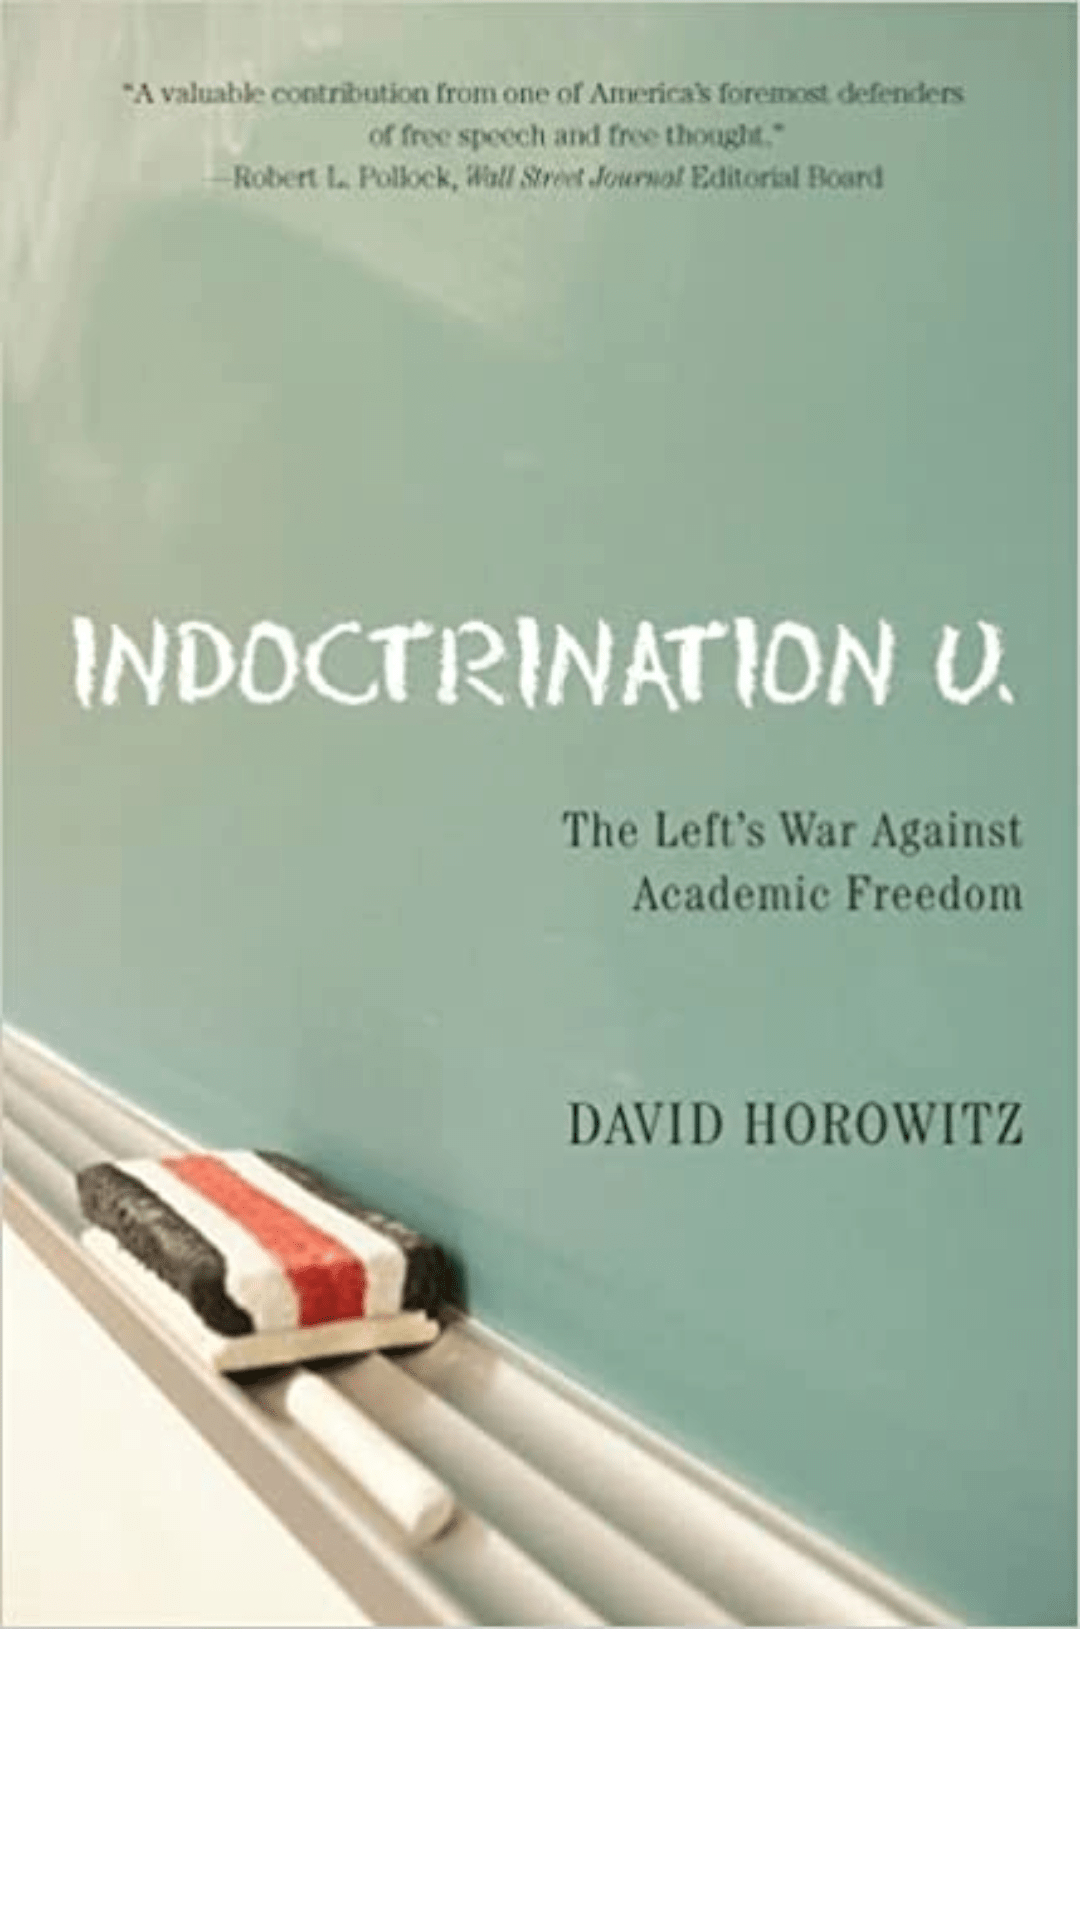 Indoctrination U: The Lefts War Against Academic Freedom